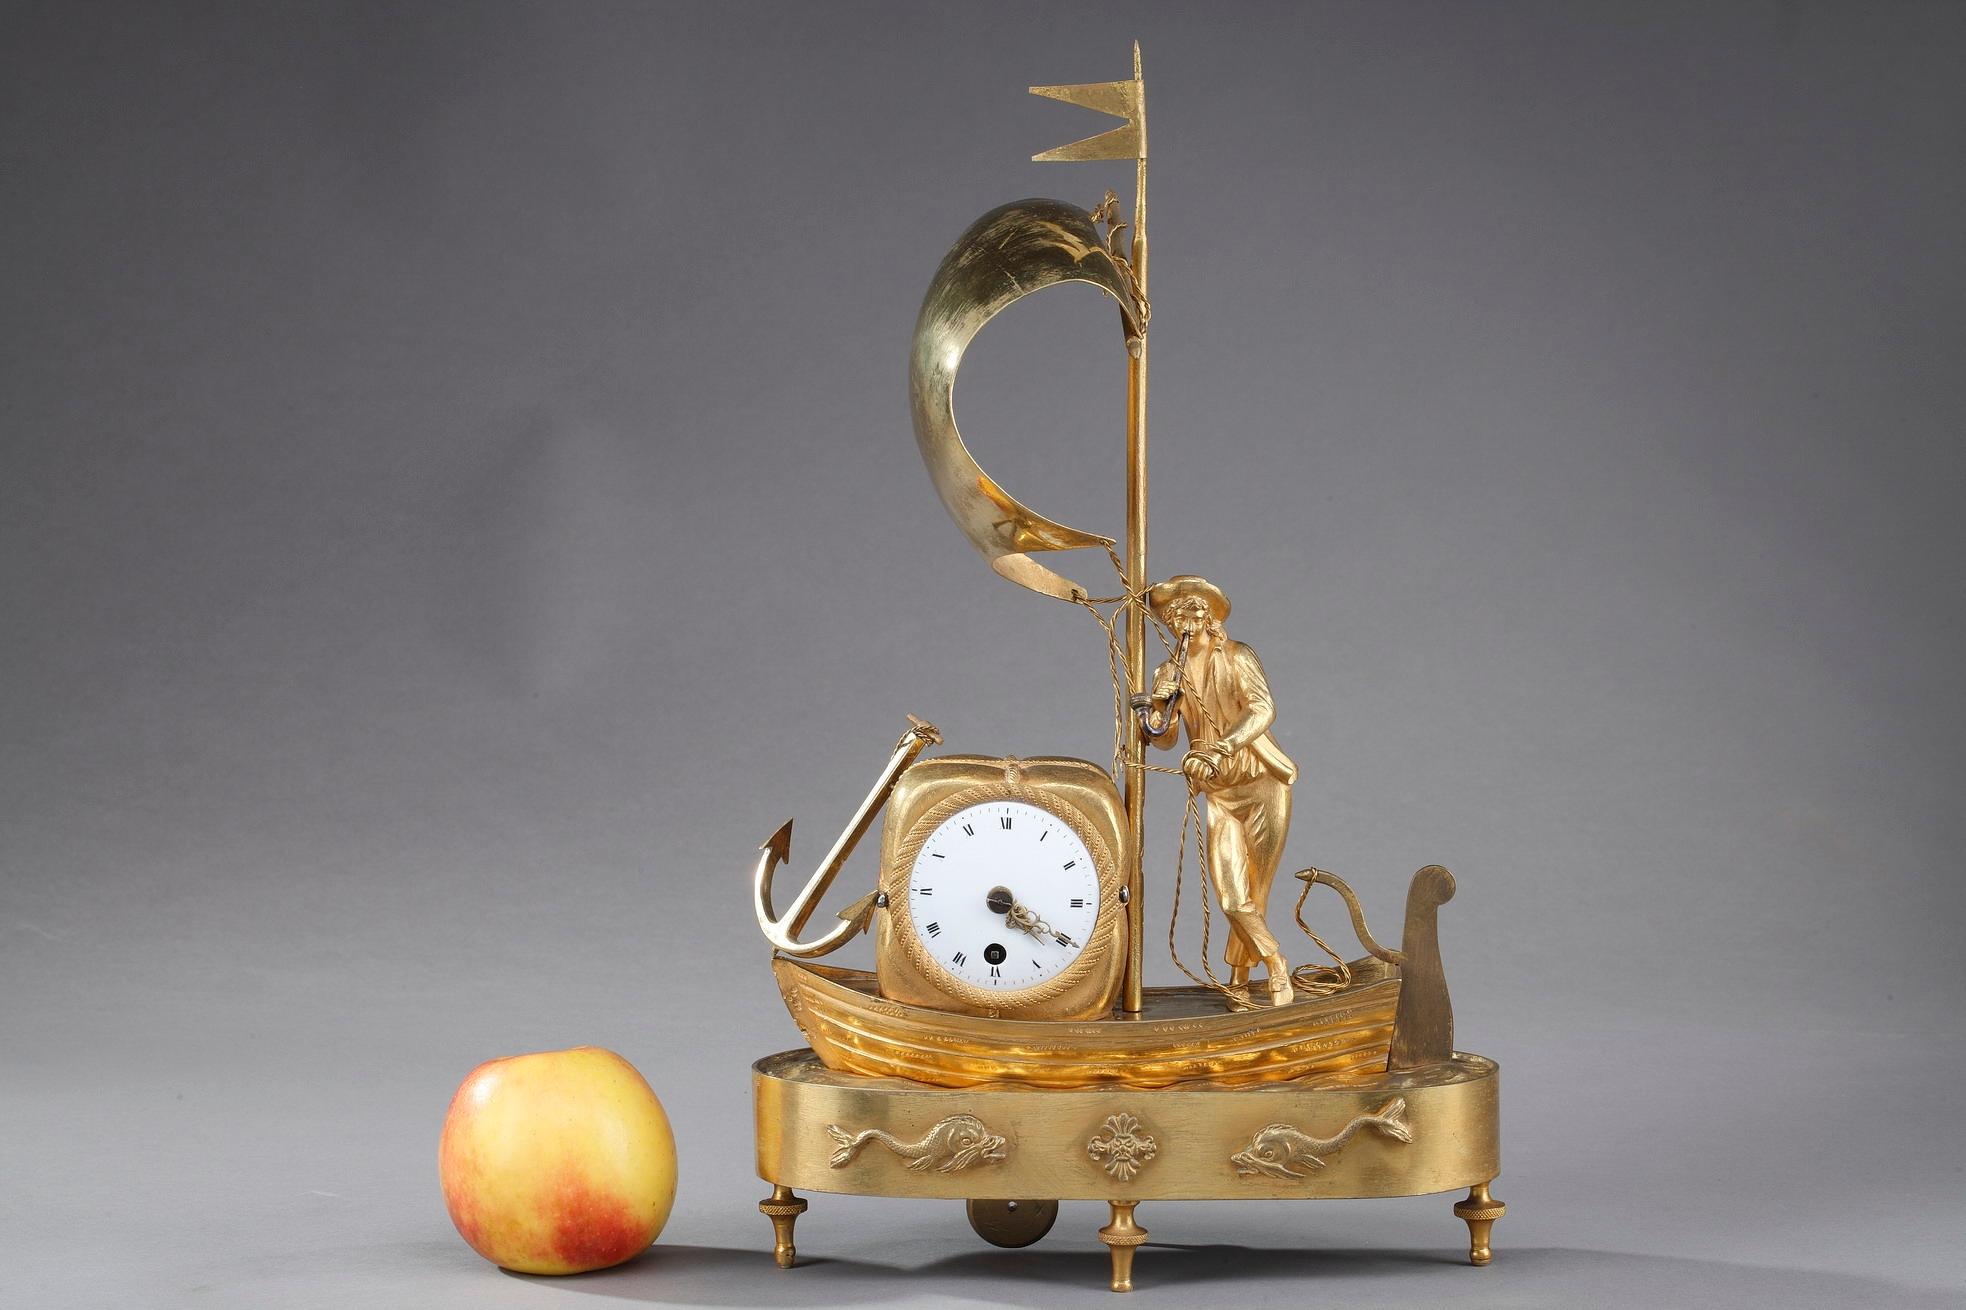 Small mantel clock The Sailor crafted of ormolu, or gilt bronze, in the early 19th century, featuring a European sailor carrying a bale of cotton on the sea. The round enamel dial features Roman numeral hours, indicated by means of two pierced gilt